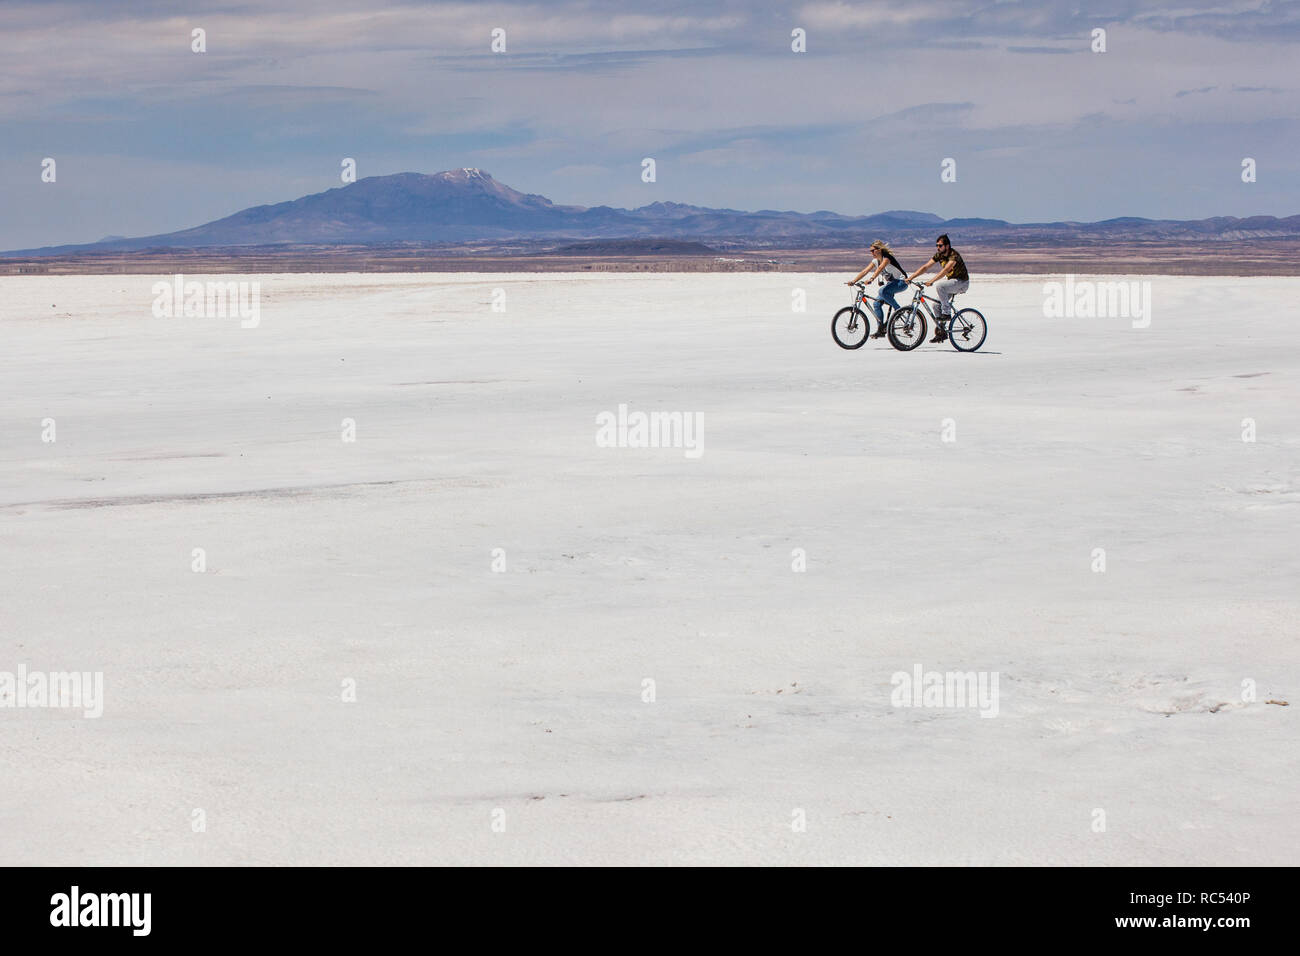 A young couple set out on the adventure of a lifetime as they cycle across the vast and open Salar de Uyuni enjoying freedom and beautiful views. Stock Photo